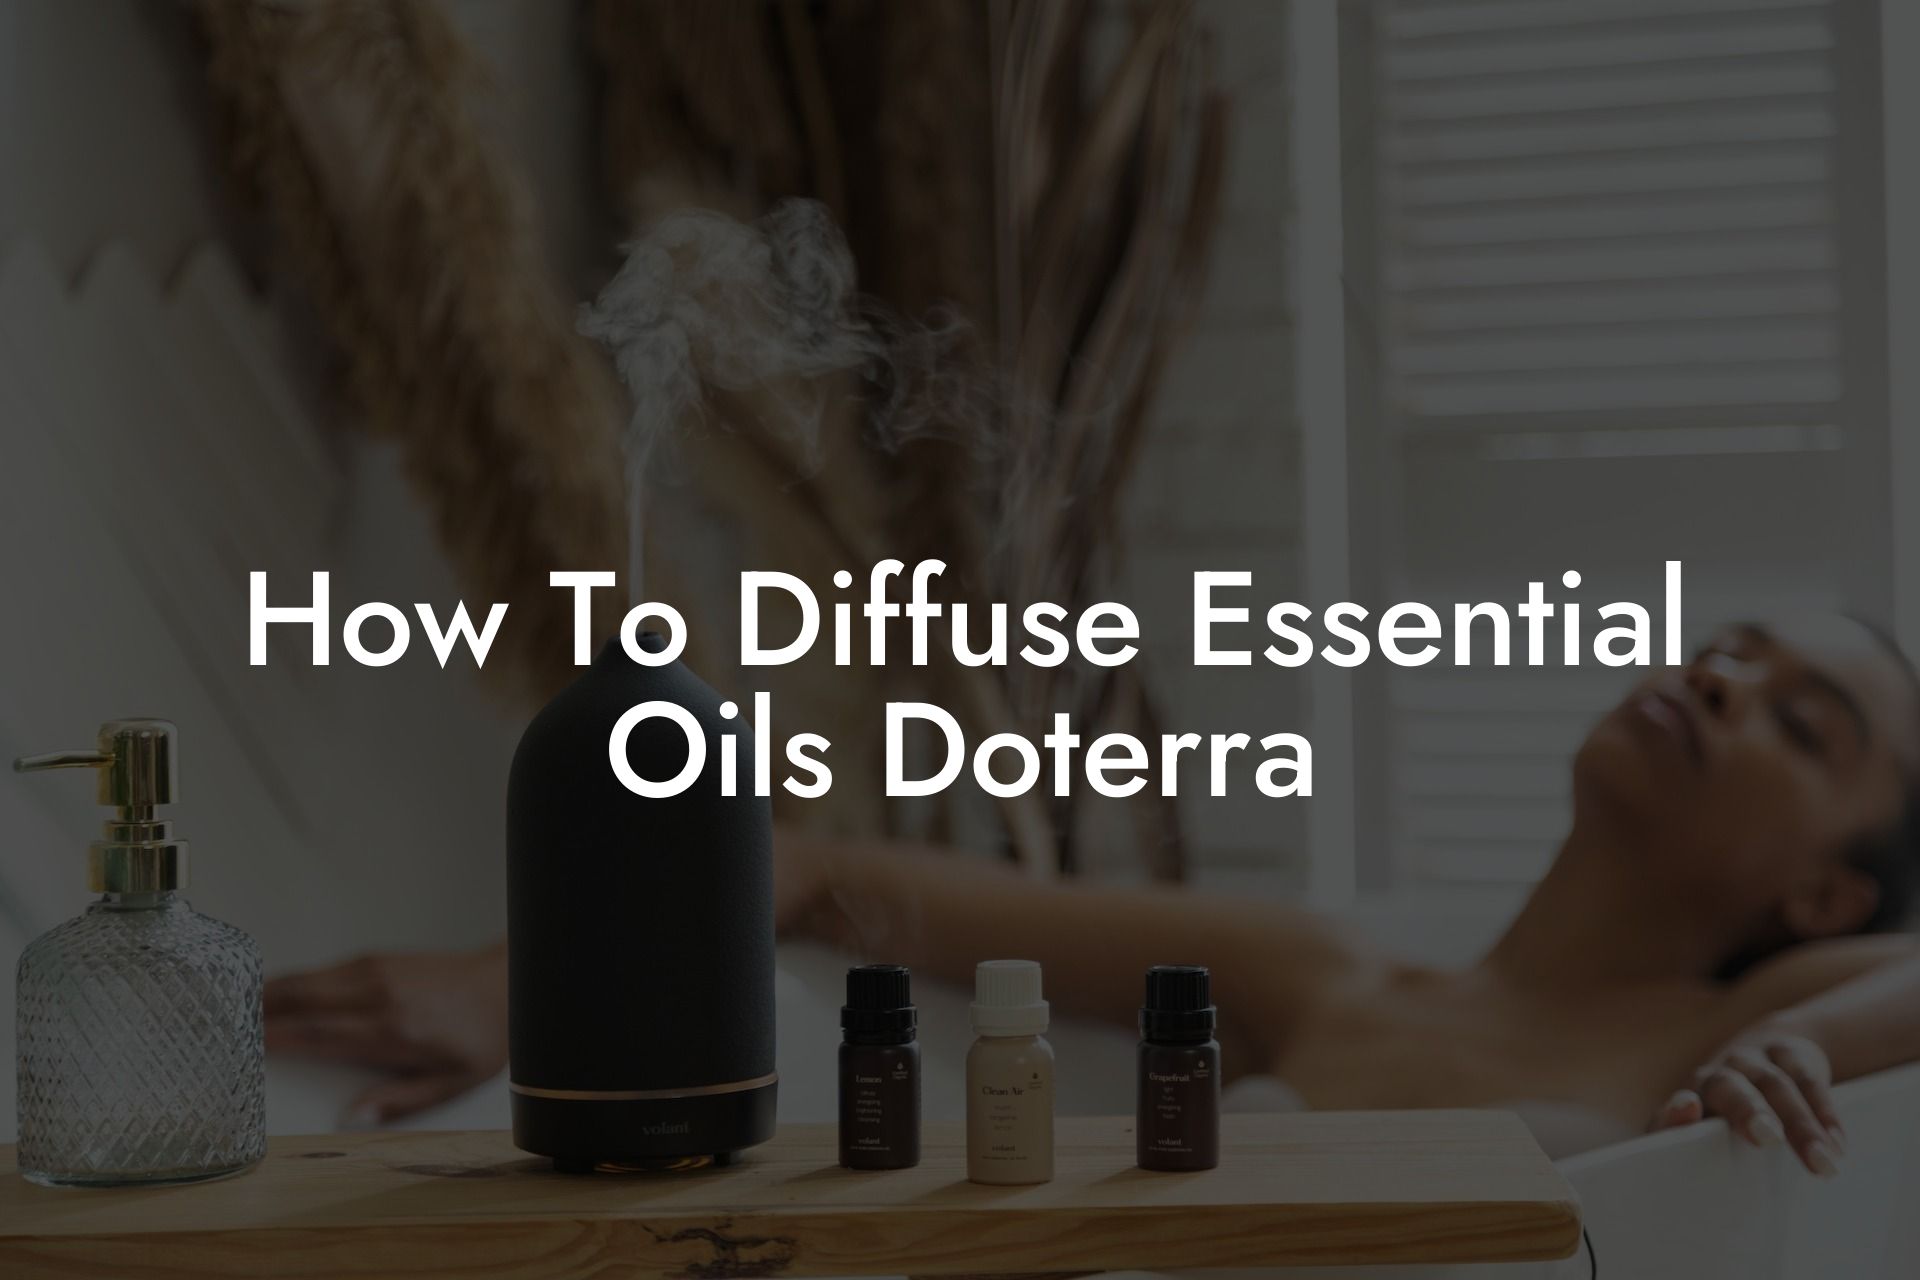 How To Diffuse Essential Oils Doterra